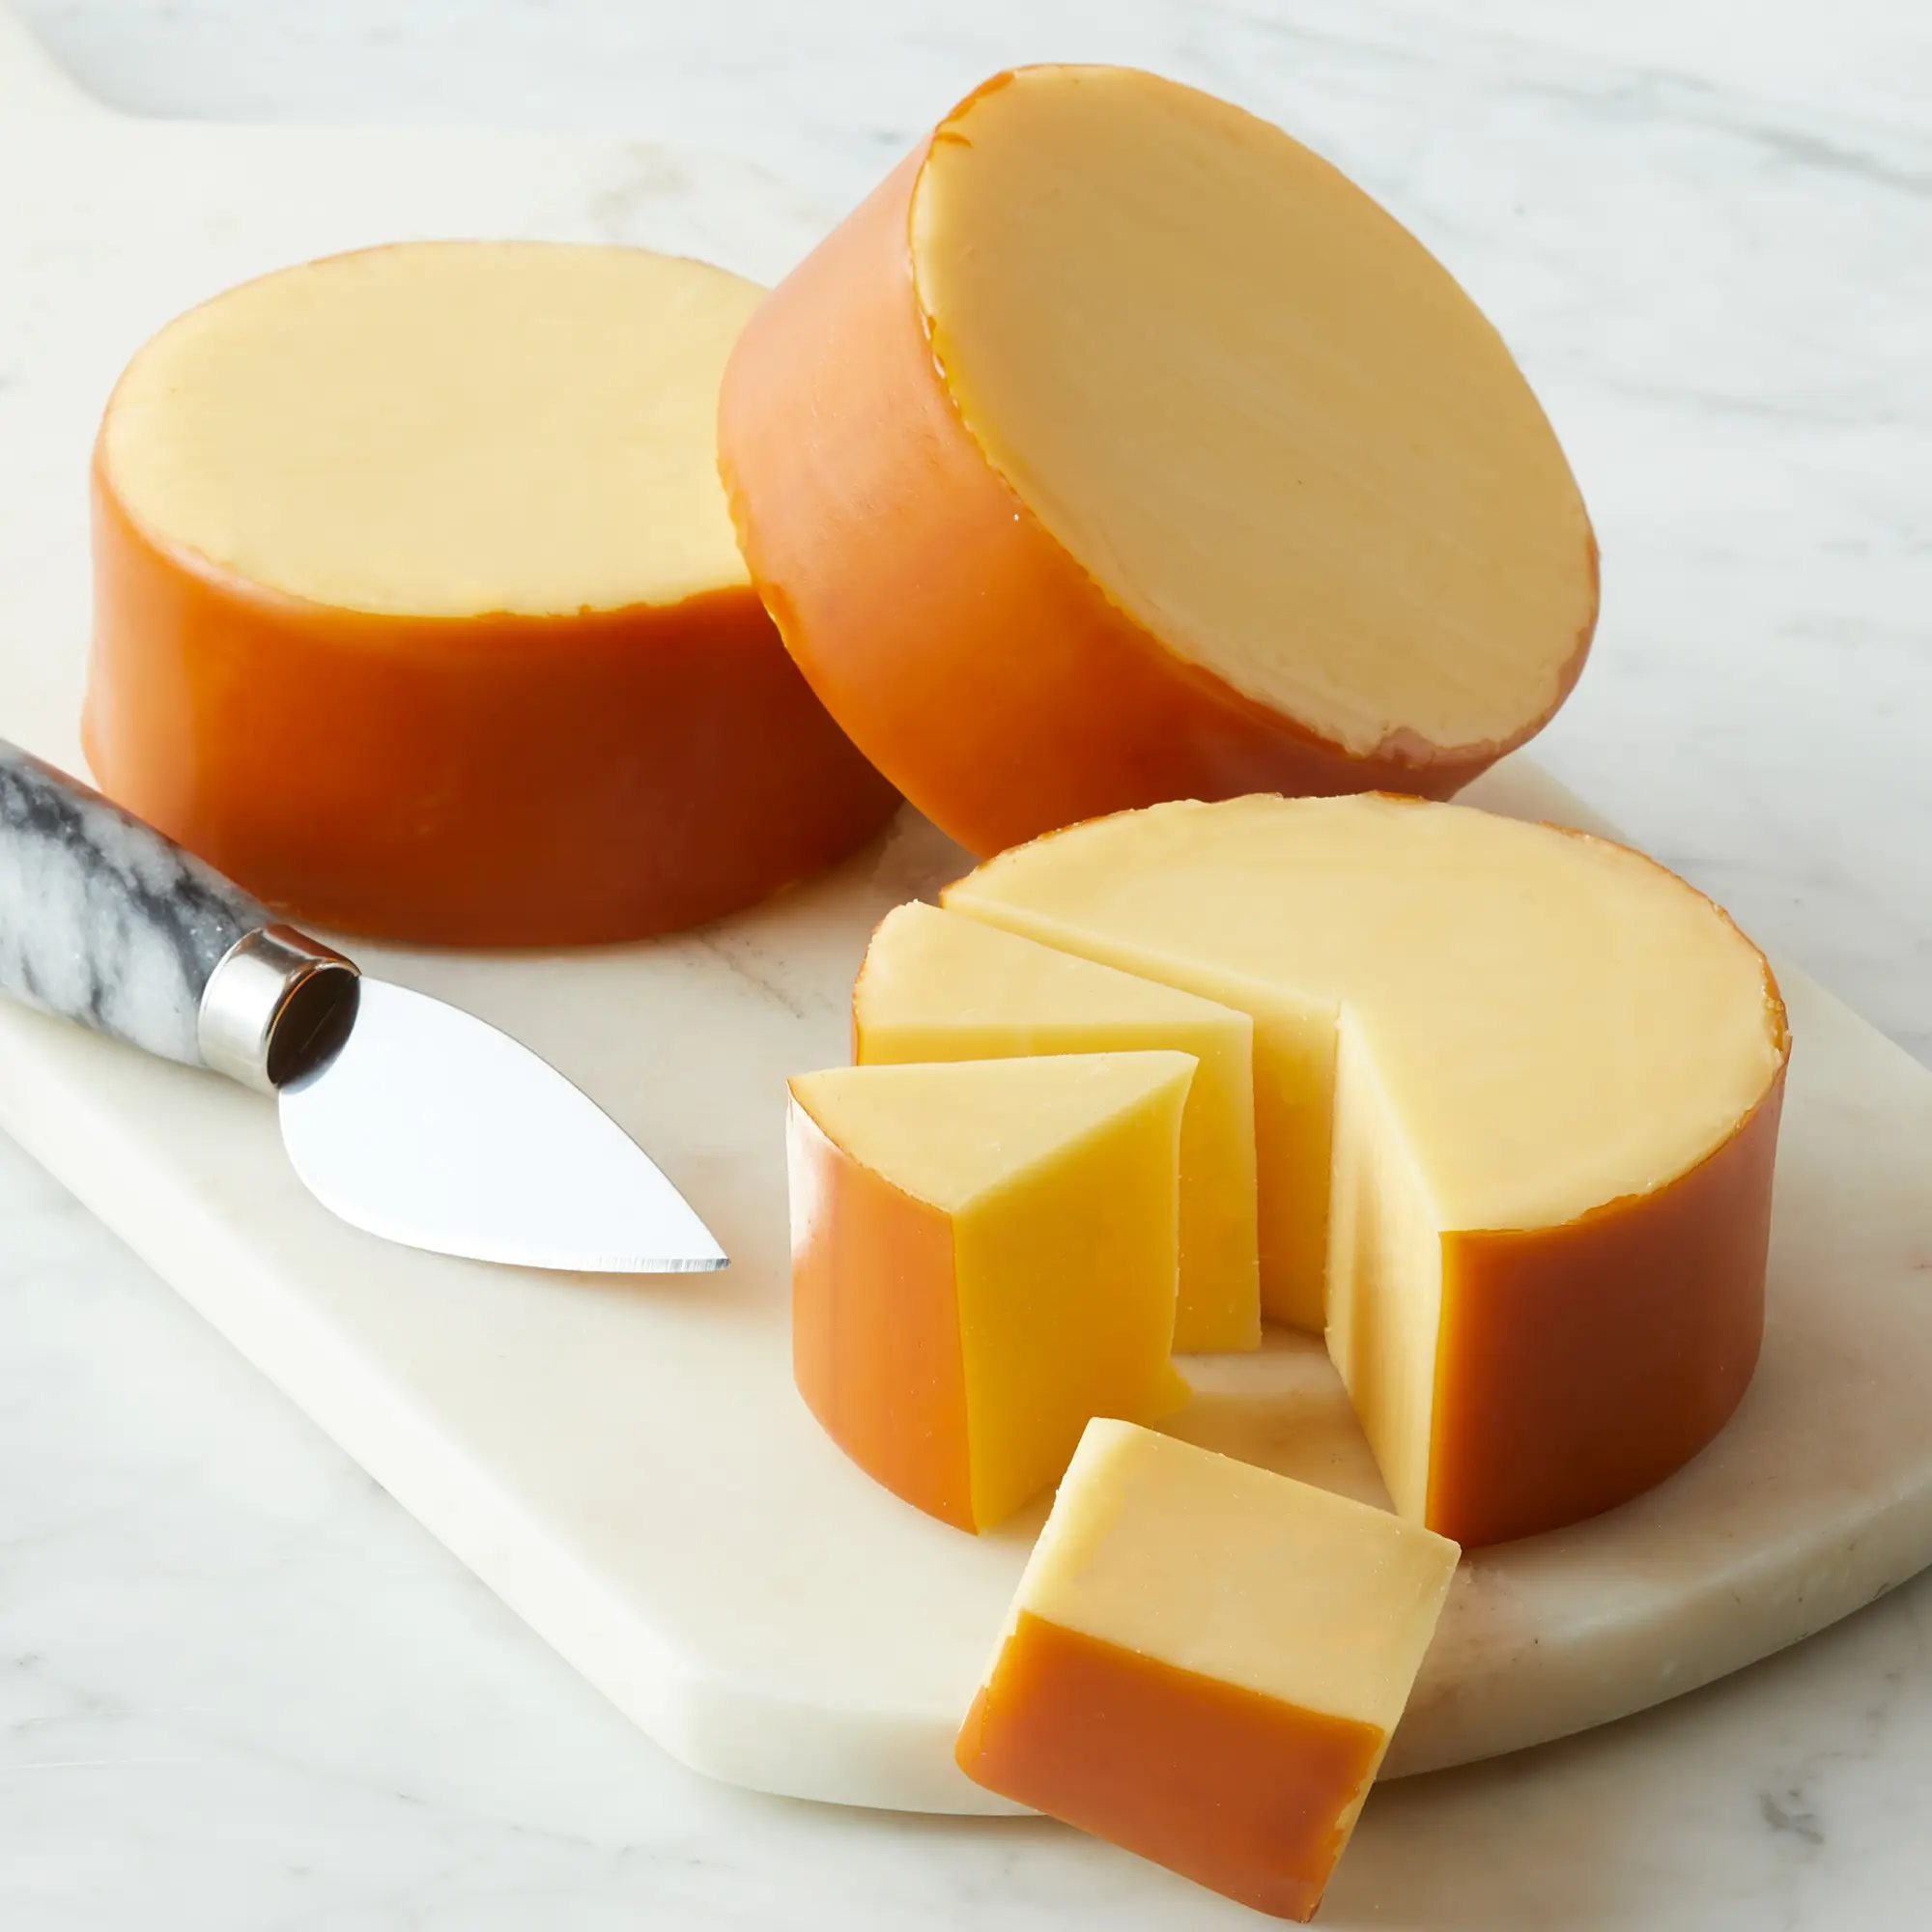 how is smoked gouda cheese made - Is all Smoked Gouda processed